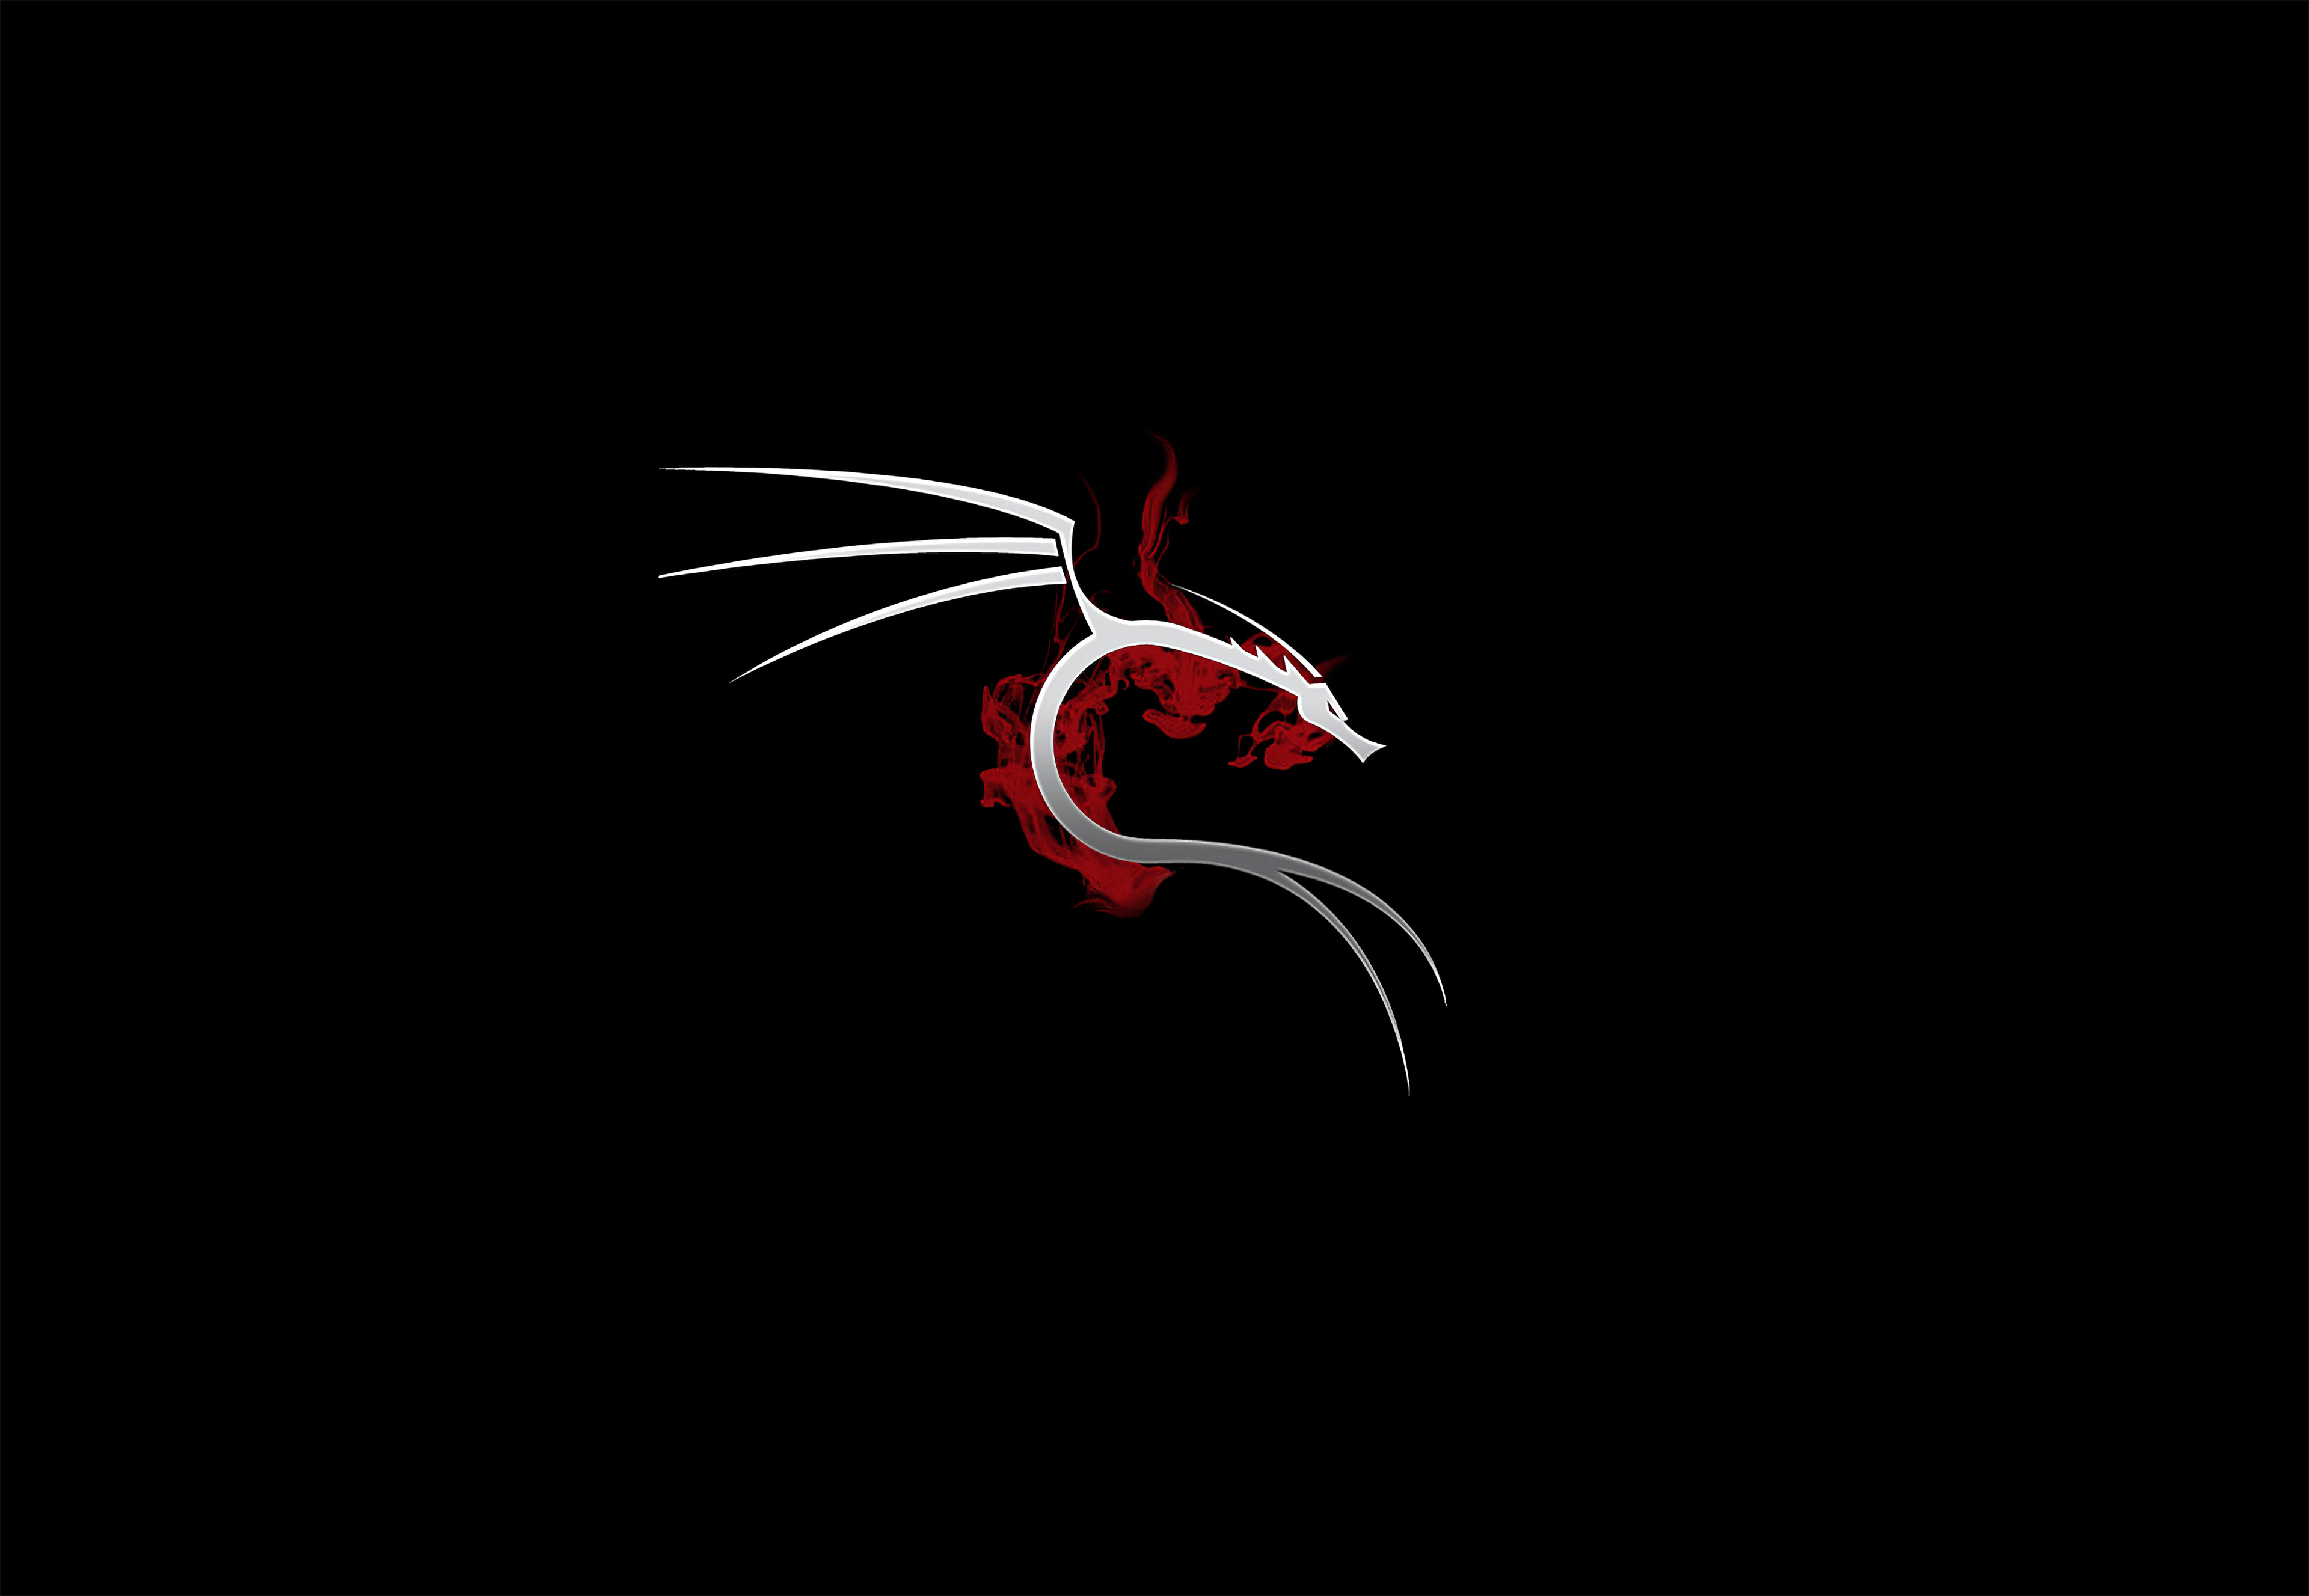 Kali Linux 4k Hd Computer 4k Wallpapers Images Backgrounds Photos And Pictures